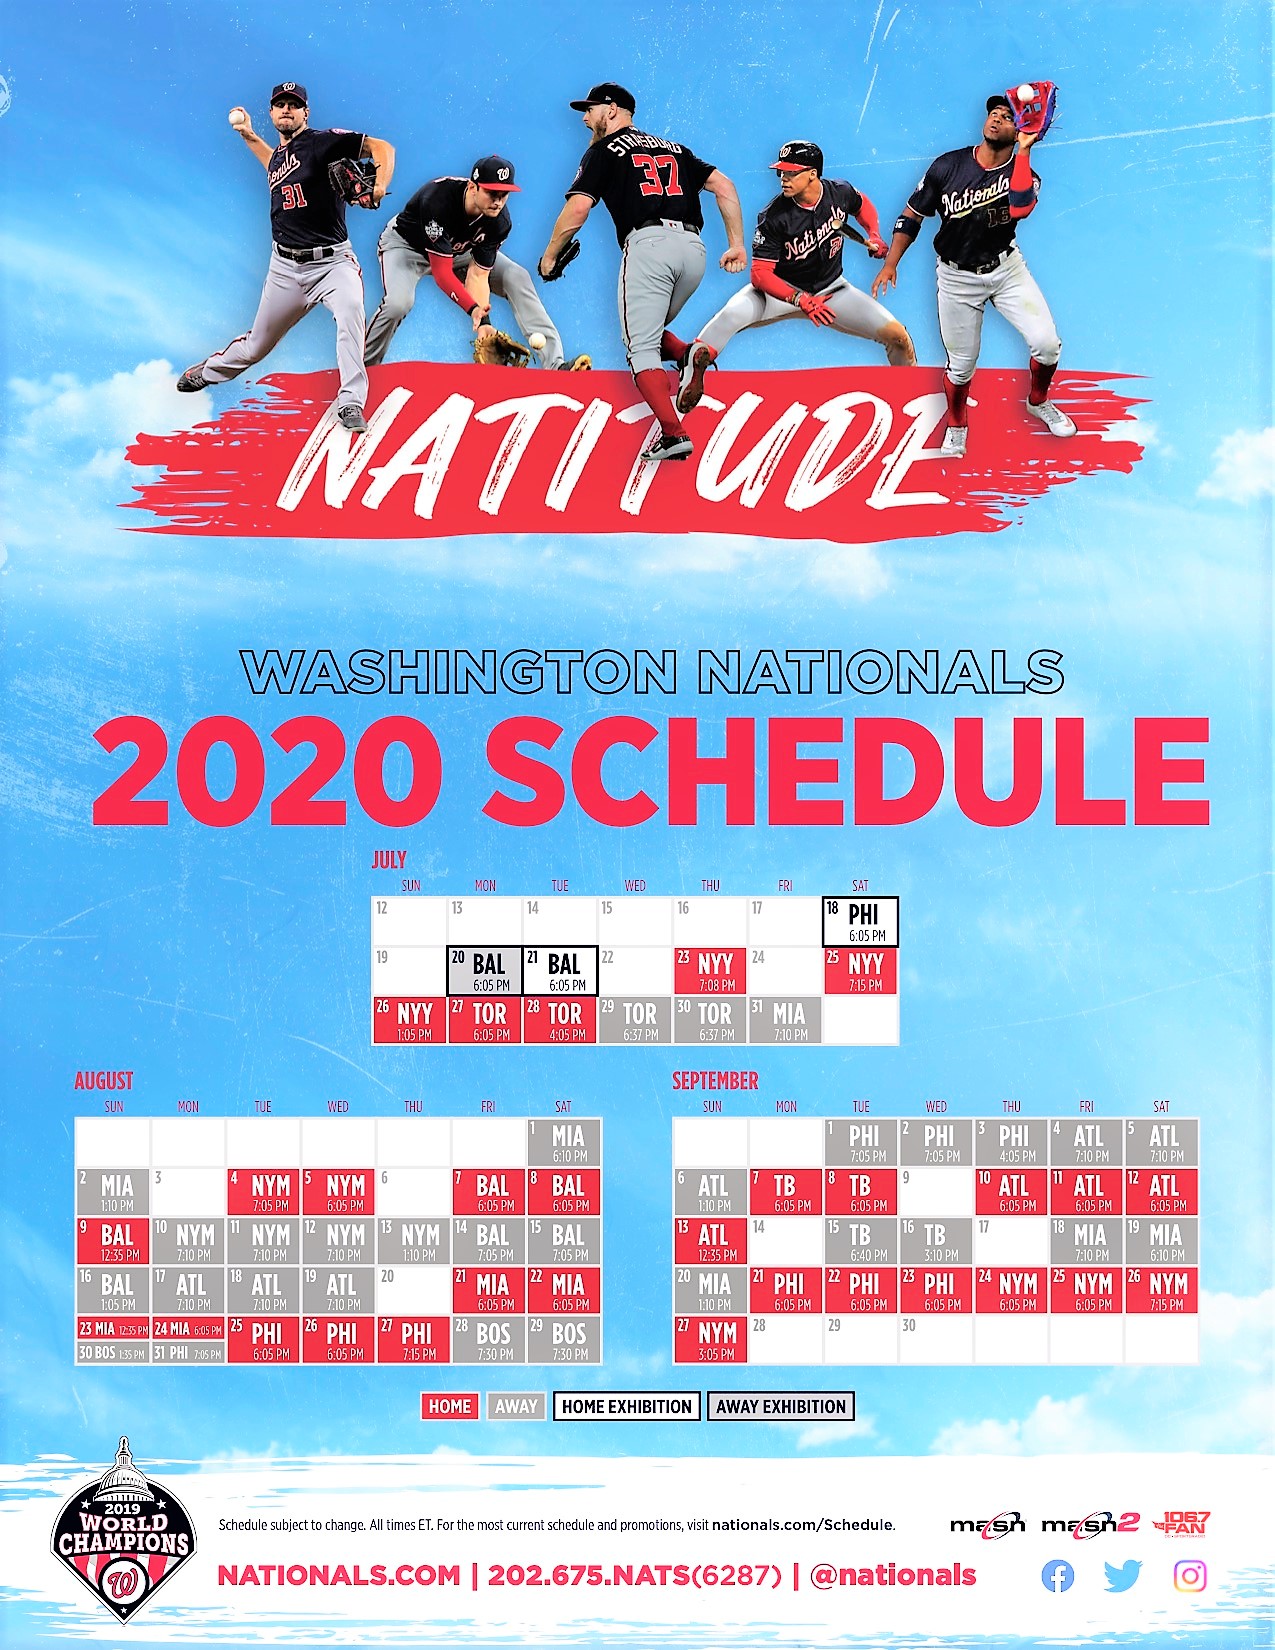 The 60game regular season schedule for the Nats